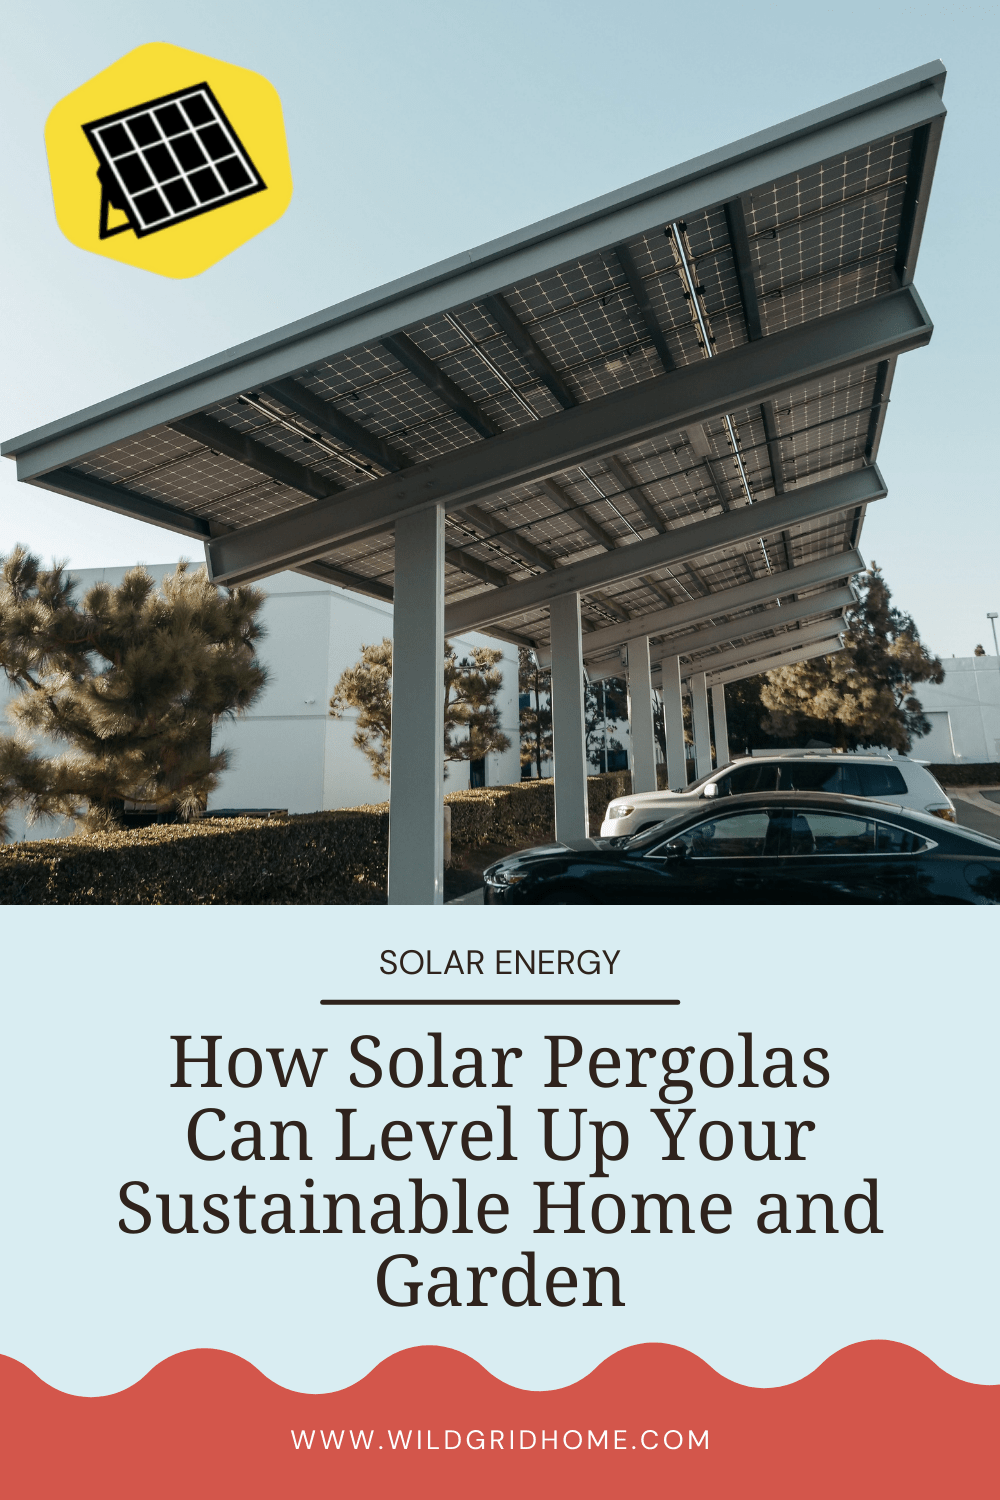 How Solar Pergolas Can Level Up Your Sustainable Home and Garden - Wildgrid Home